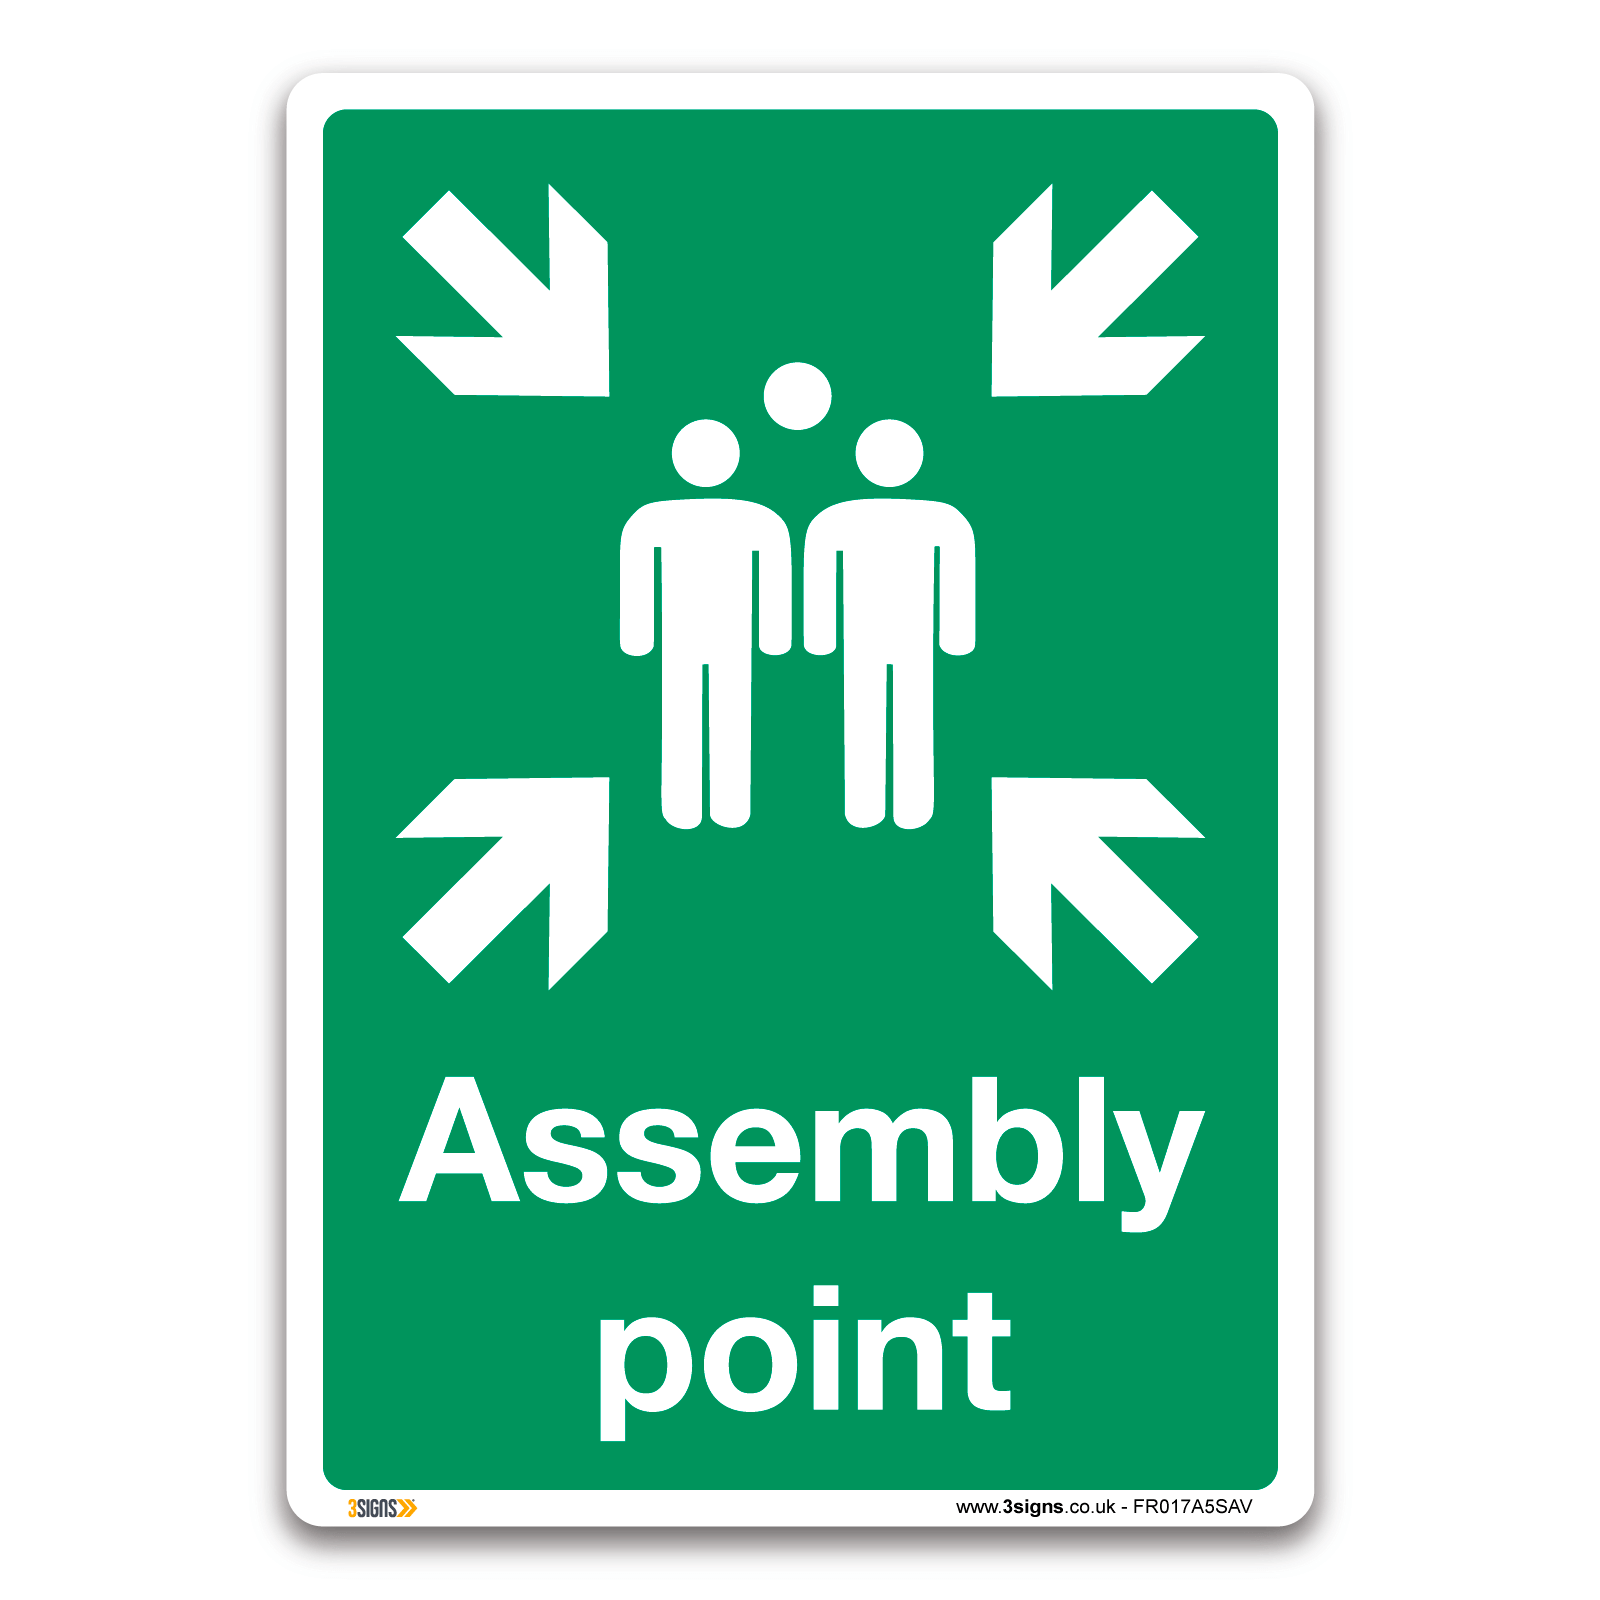 fire-assembly-point-sign-medipost-self-adhesive-vinyl-in-a5-size